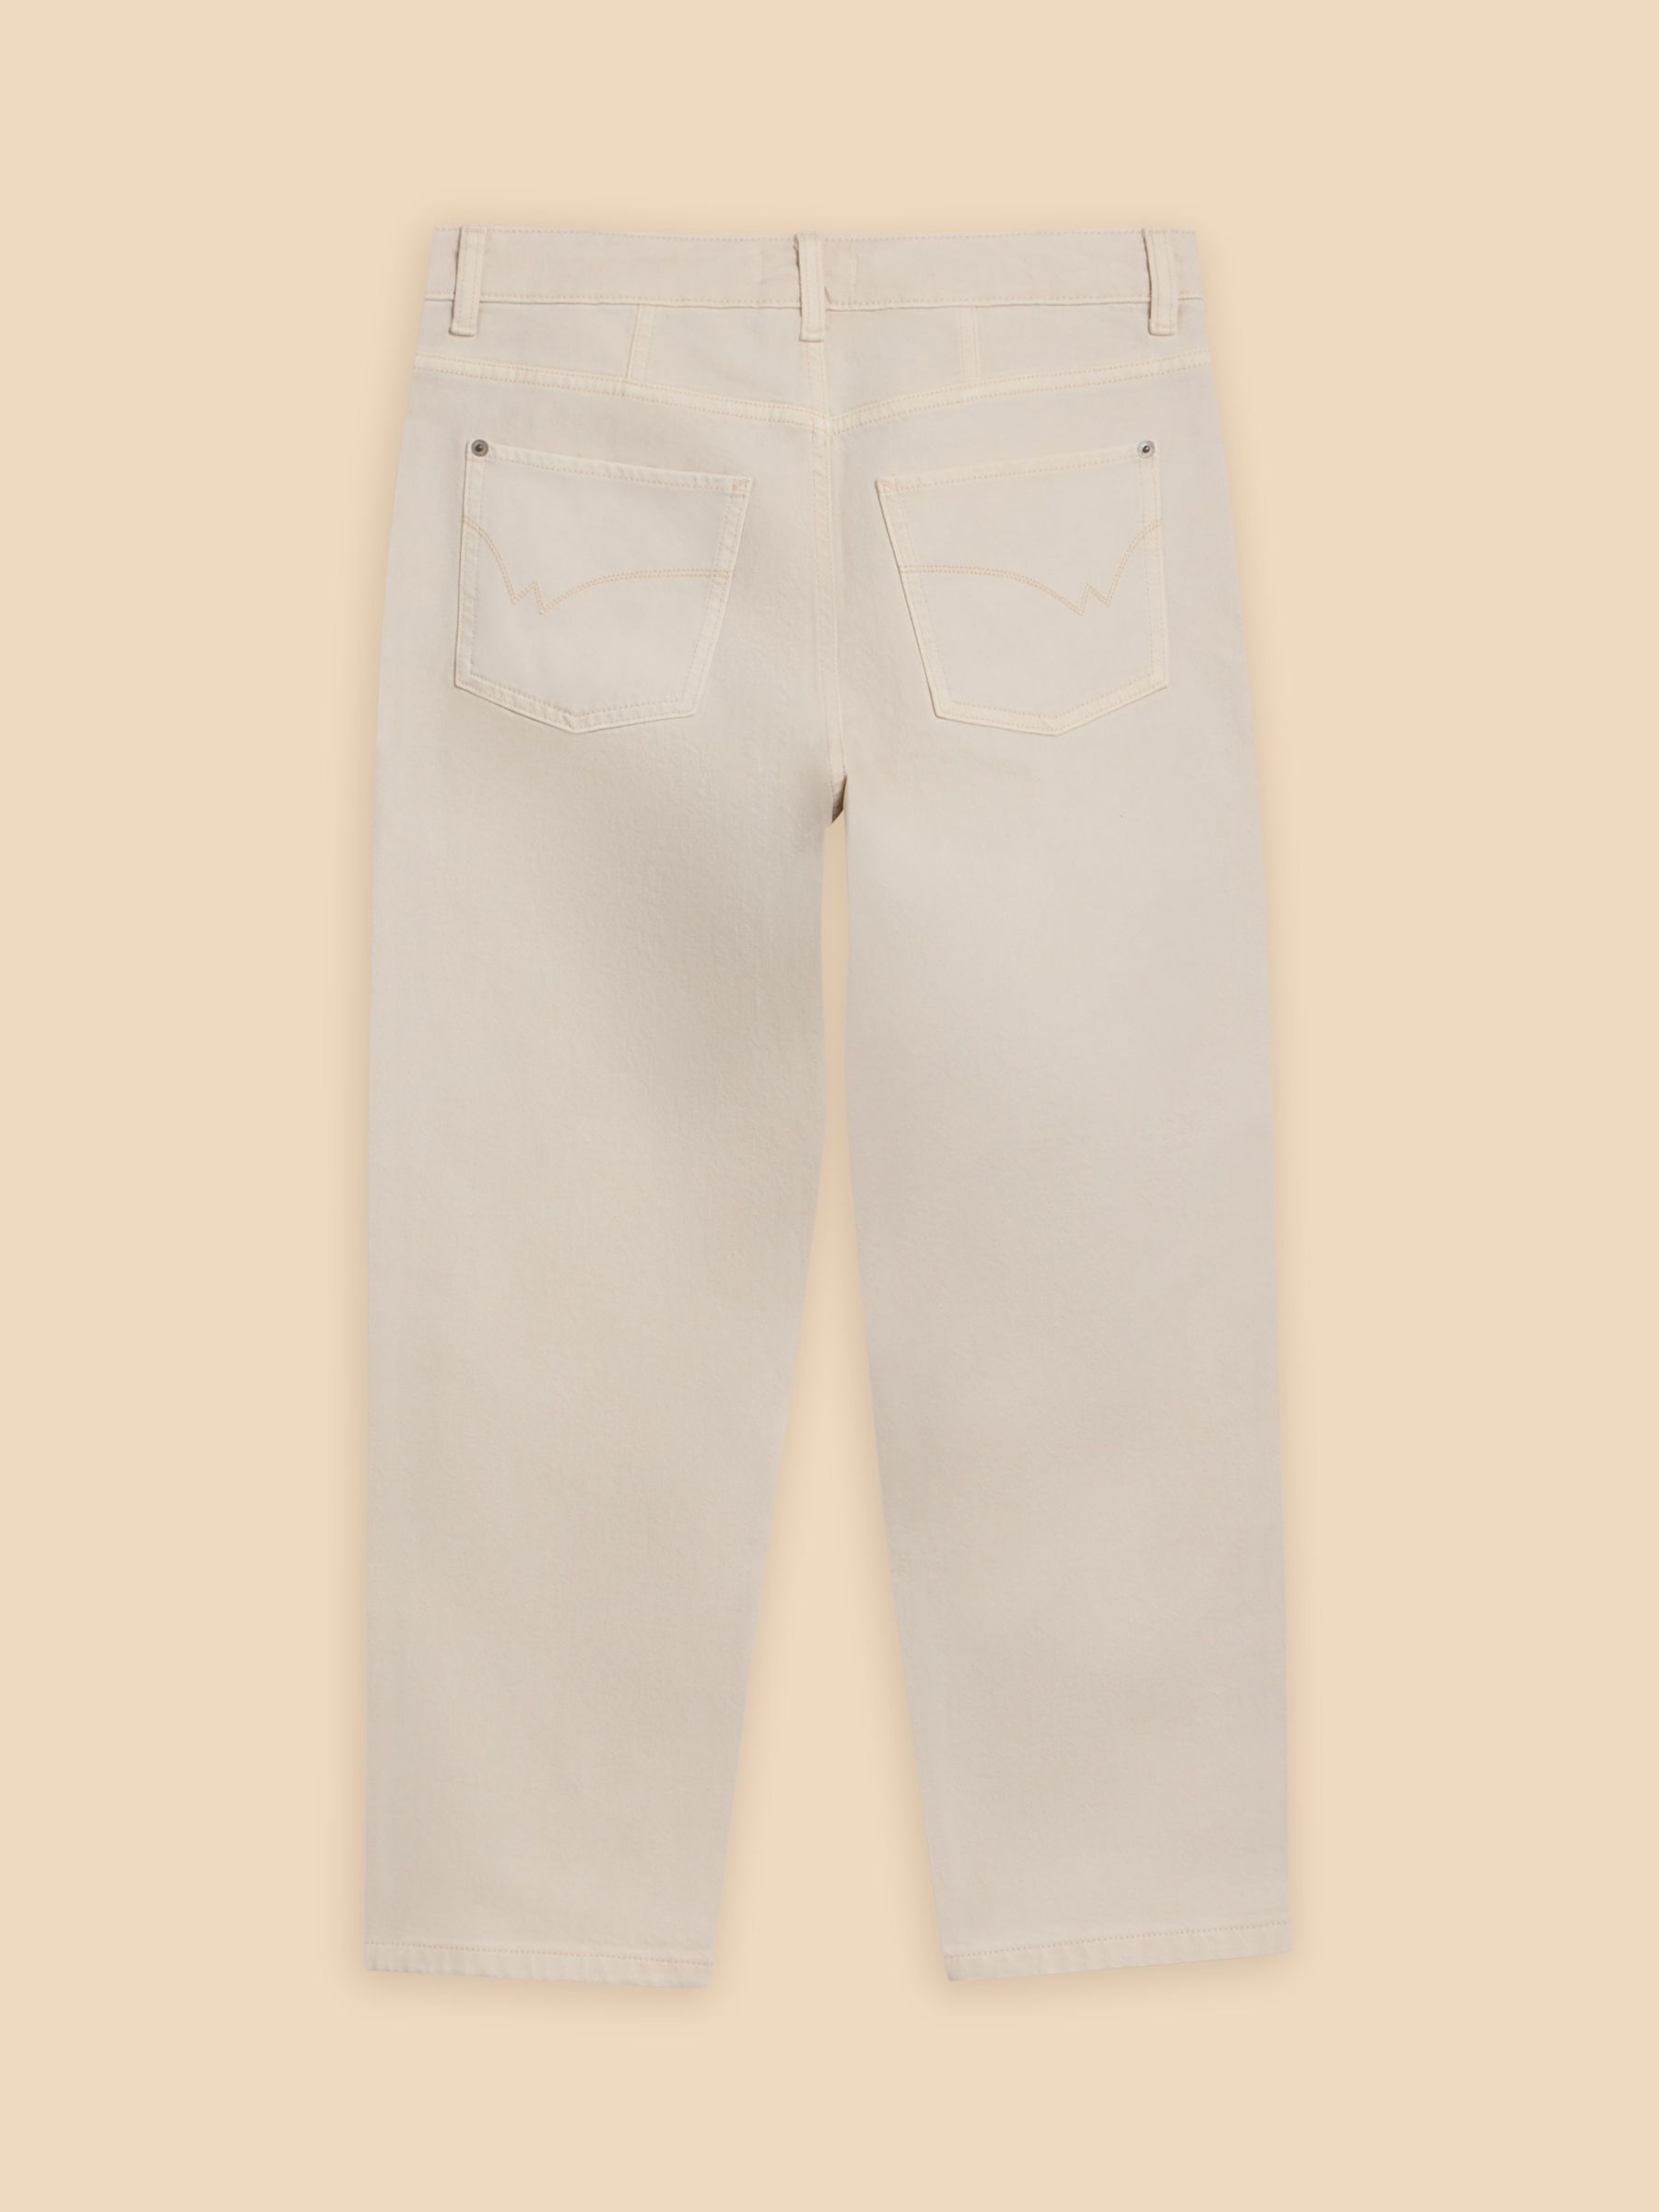 Buy White Stuff Charlie Cotton Blend Straight Cropped Jeans, Natural Online at johnlewis.com